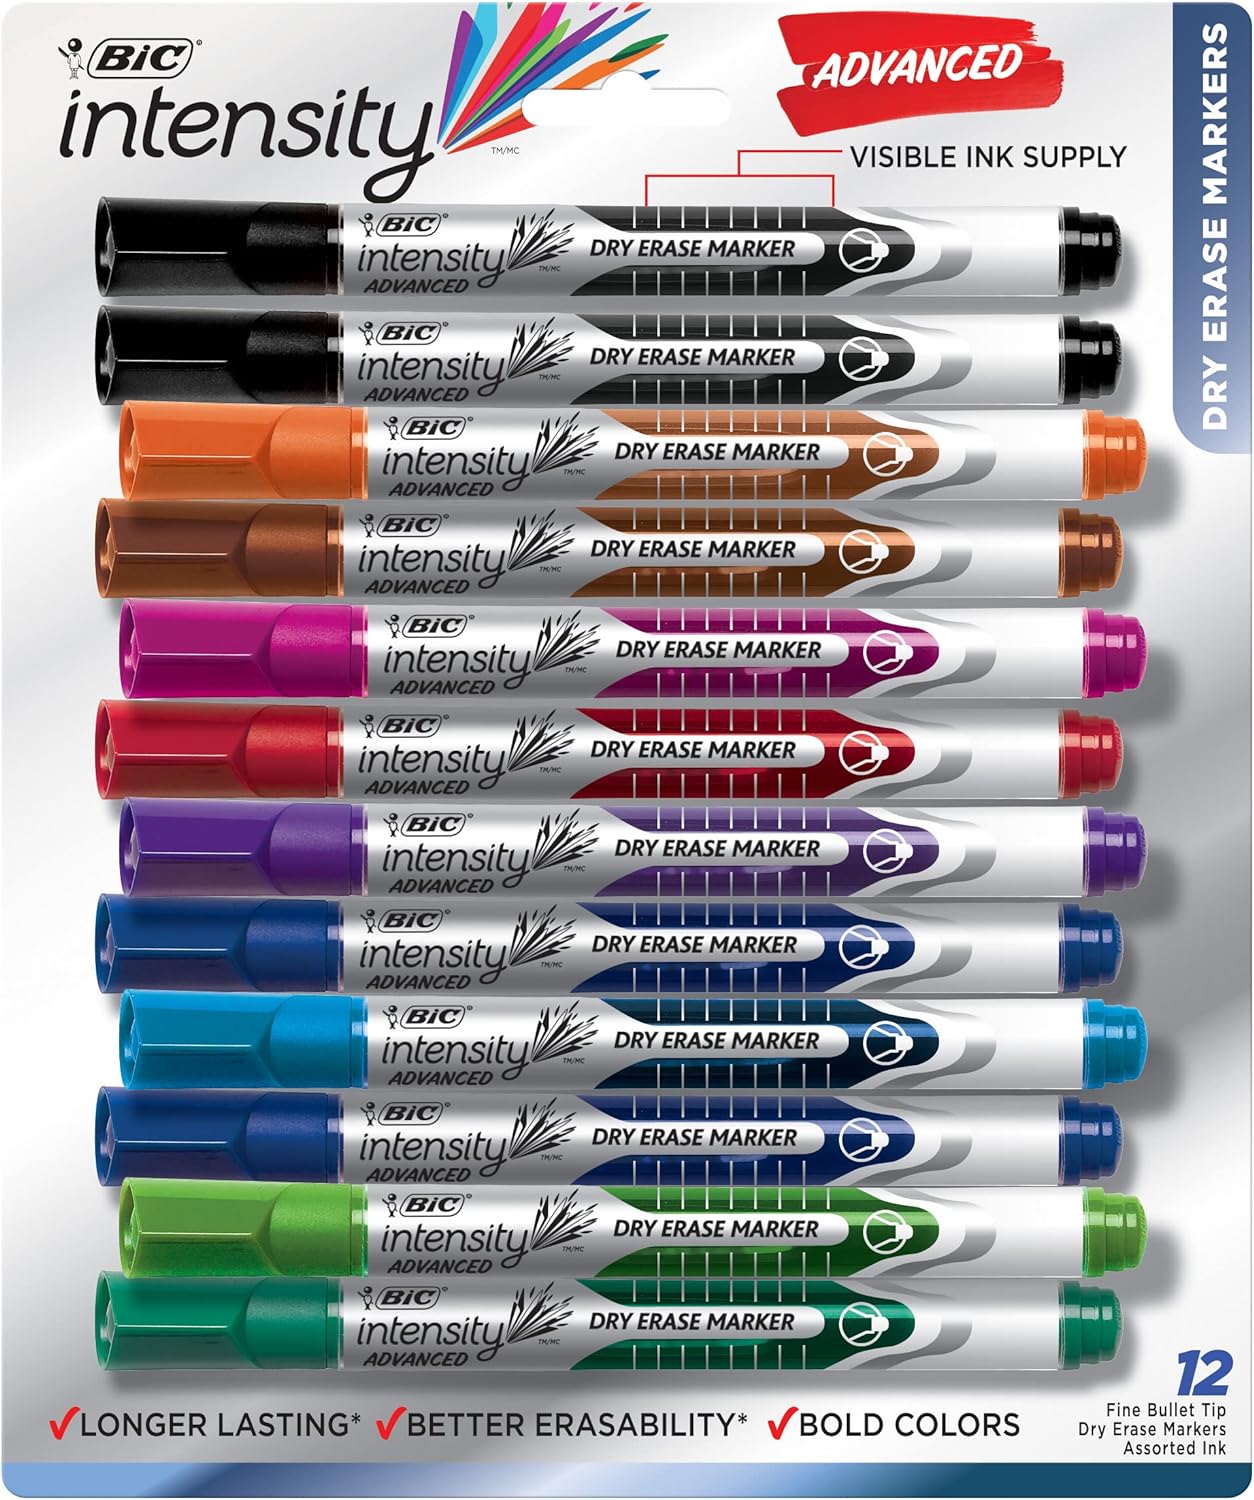 It' so nice to not smudge while writing on my dry erase board. The best markers I've used. Colors are vibrant, they erase easily and don't smear.